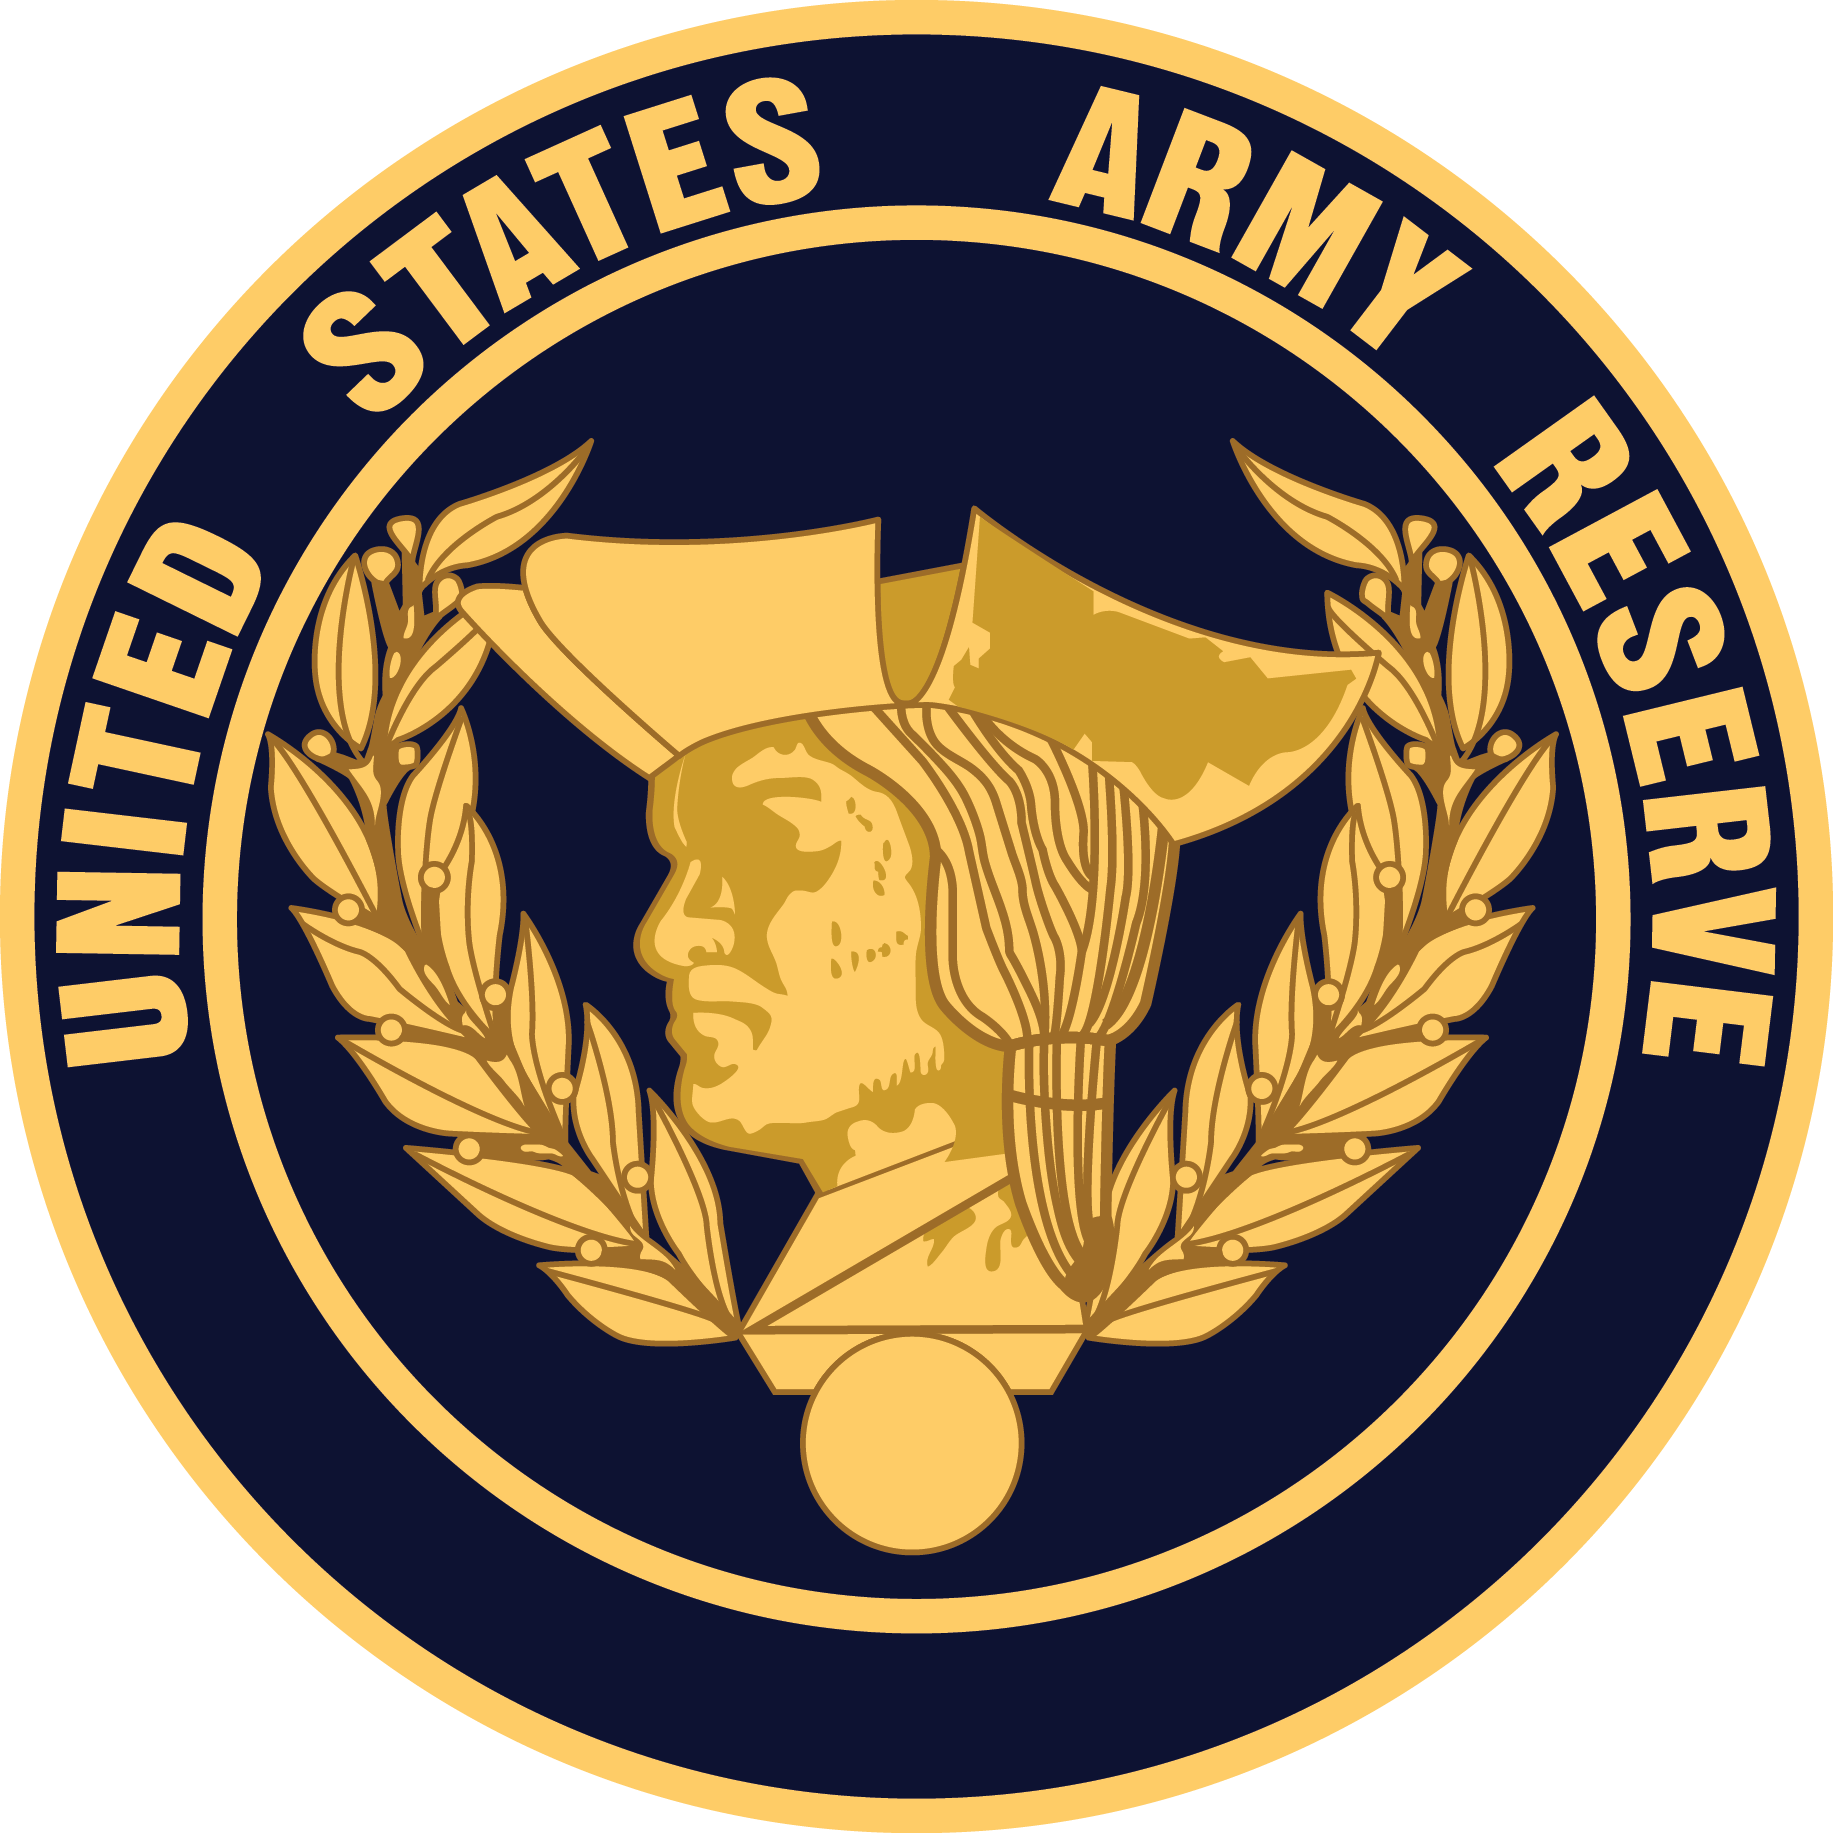 Official emblem of the United States Army Reserve featuring a central profile of a soldier, surrounded by laurel wreath and a gold and blue color scheme, symbolizing excellence in Learning and Development.